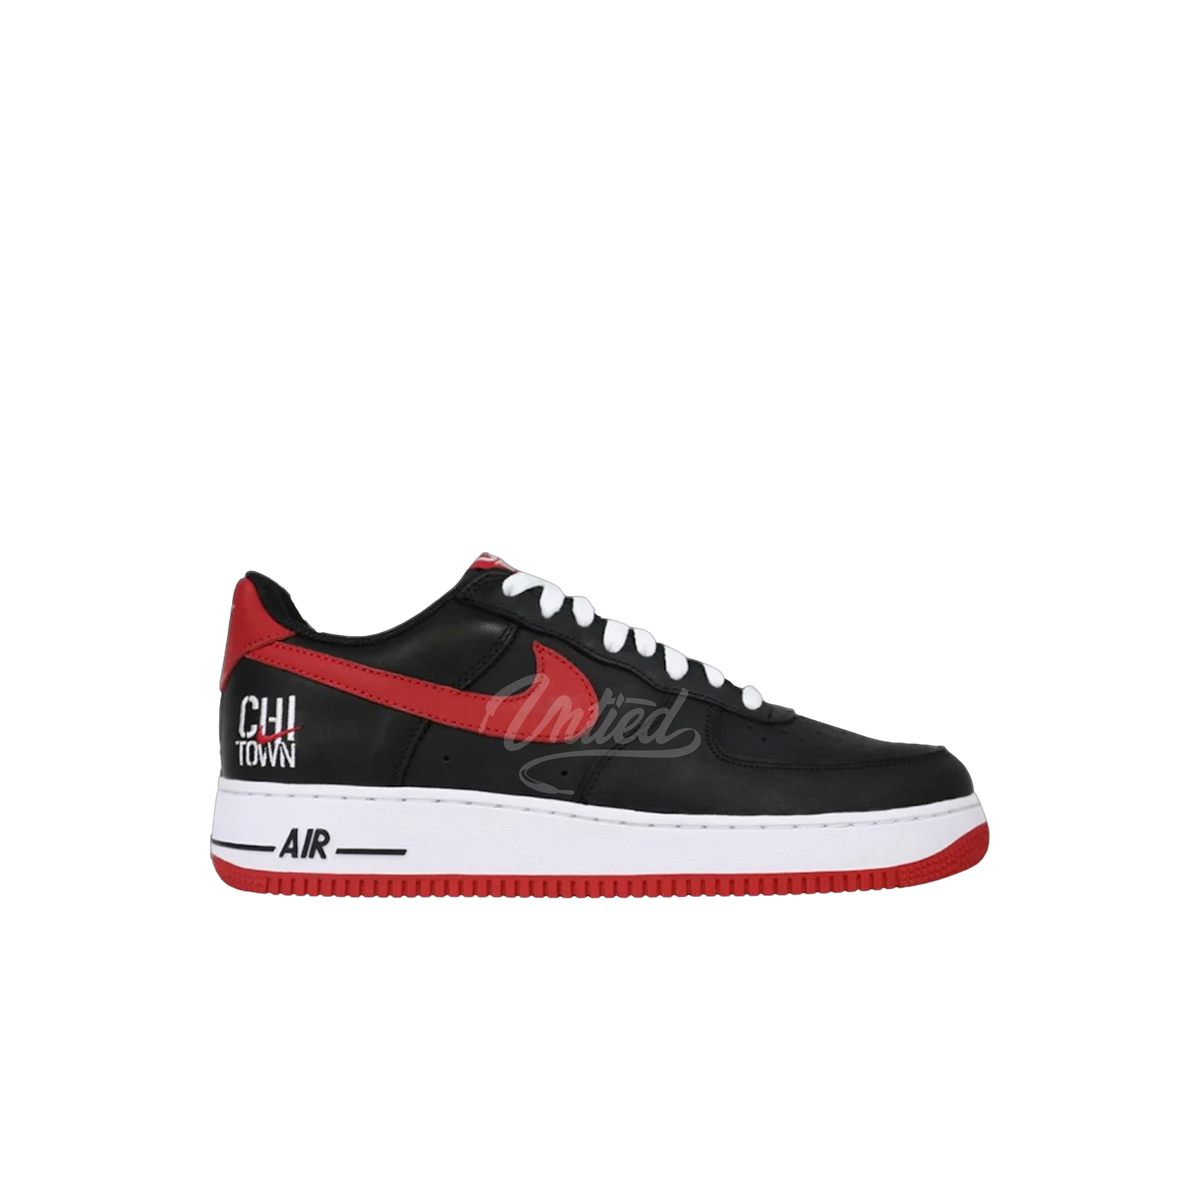 Air Force 1 "Chi Town"